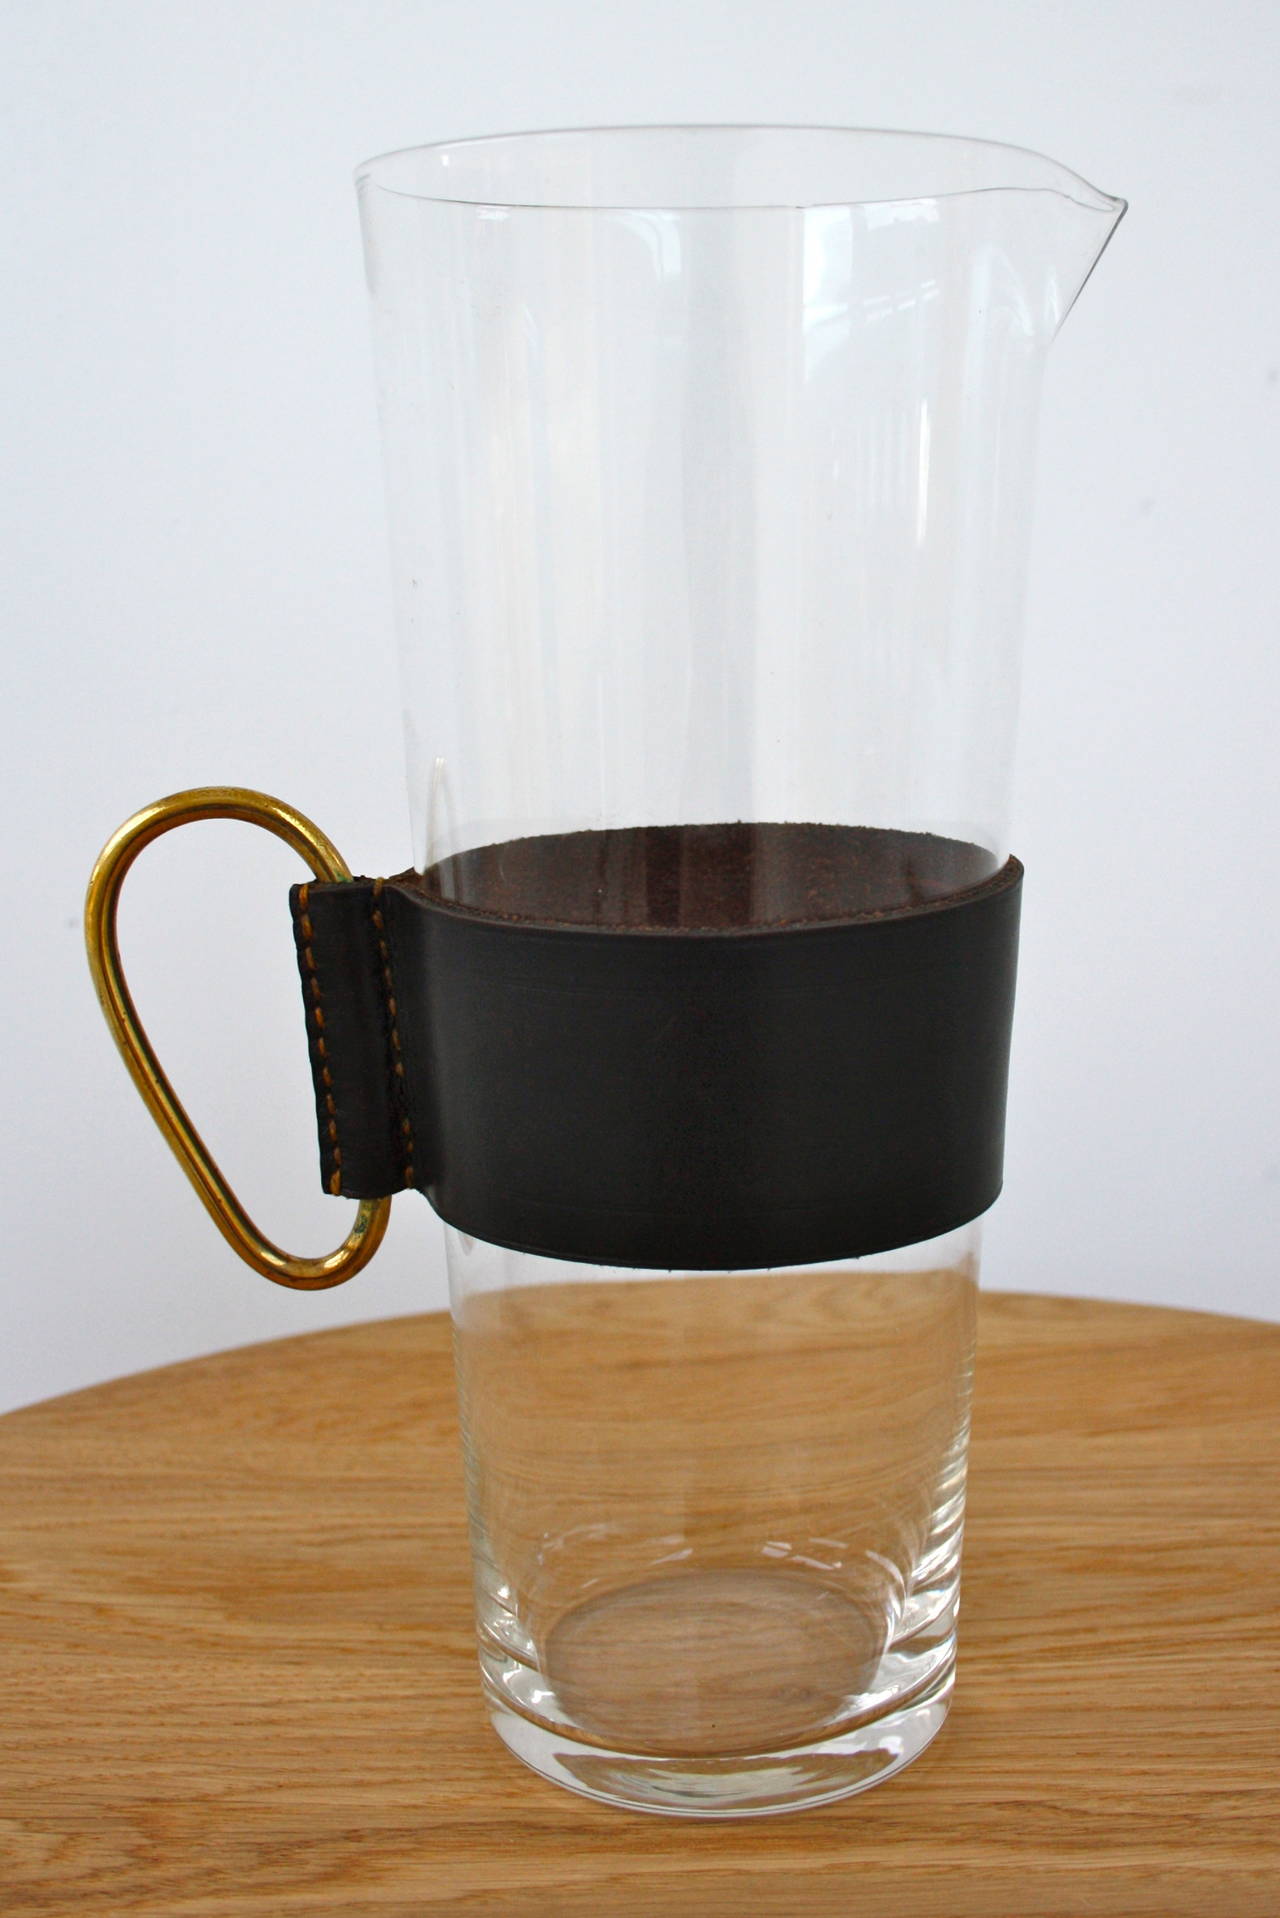 A large glass jug from the Carl Aubock Workshop. The jug is strong and tall, great for entertaining. Easy cleaning as the beautiful black sleeve slides straight off. Attached to the sleeve is solid brass ring handle, cast in the workshop, its